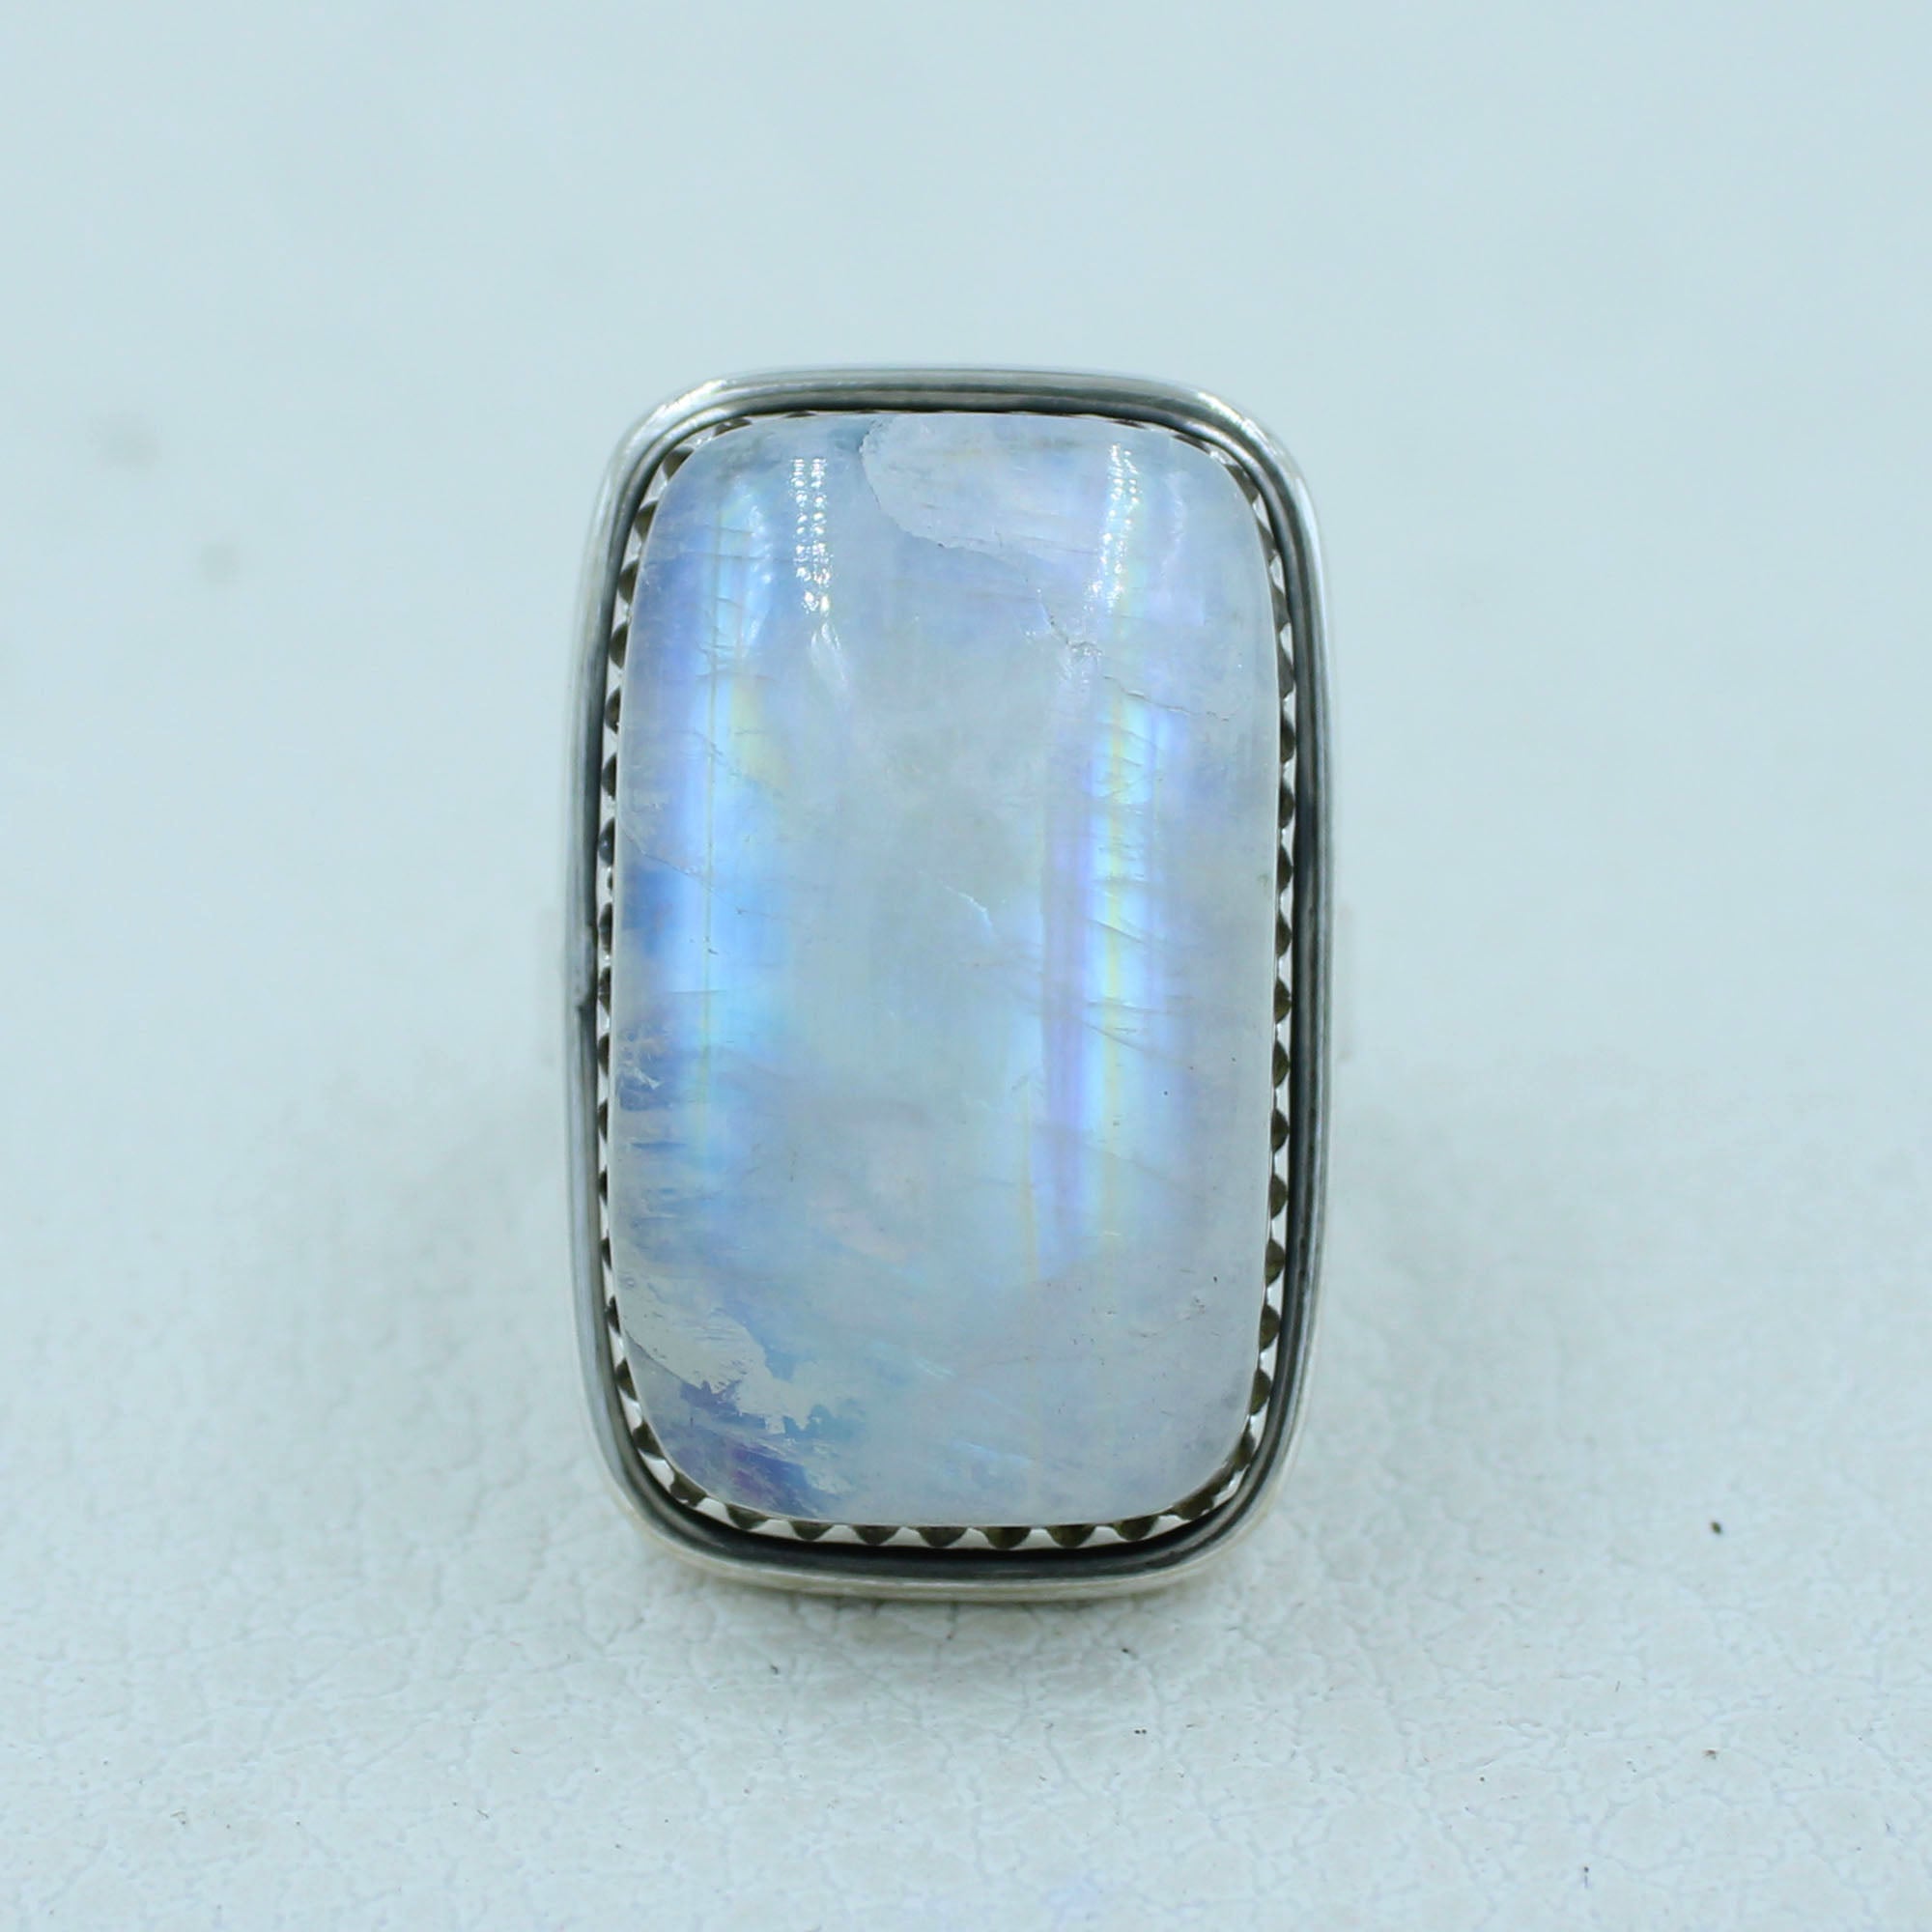 Lovely High Quality Rainbow Moonstone Ring